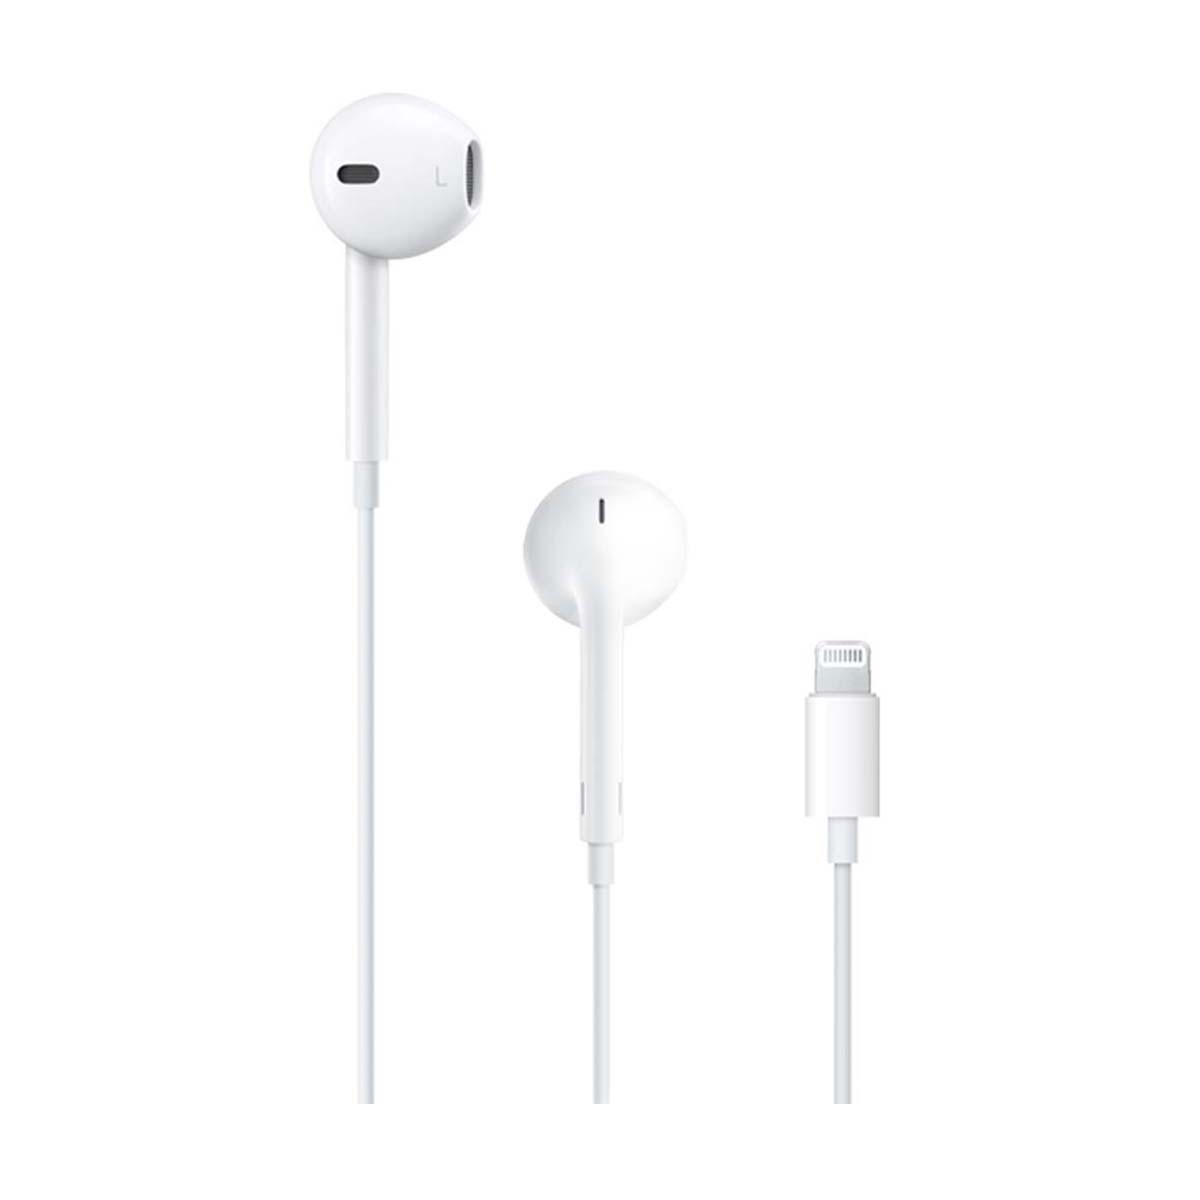 Headphones for iPhone, Handsfree with Lightning Cable